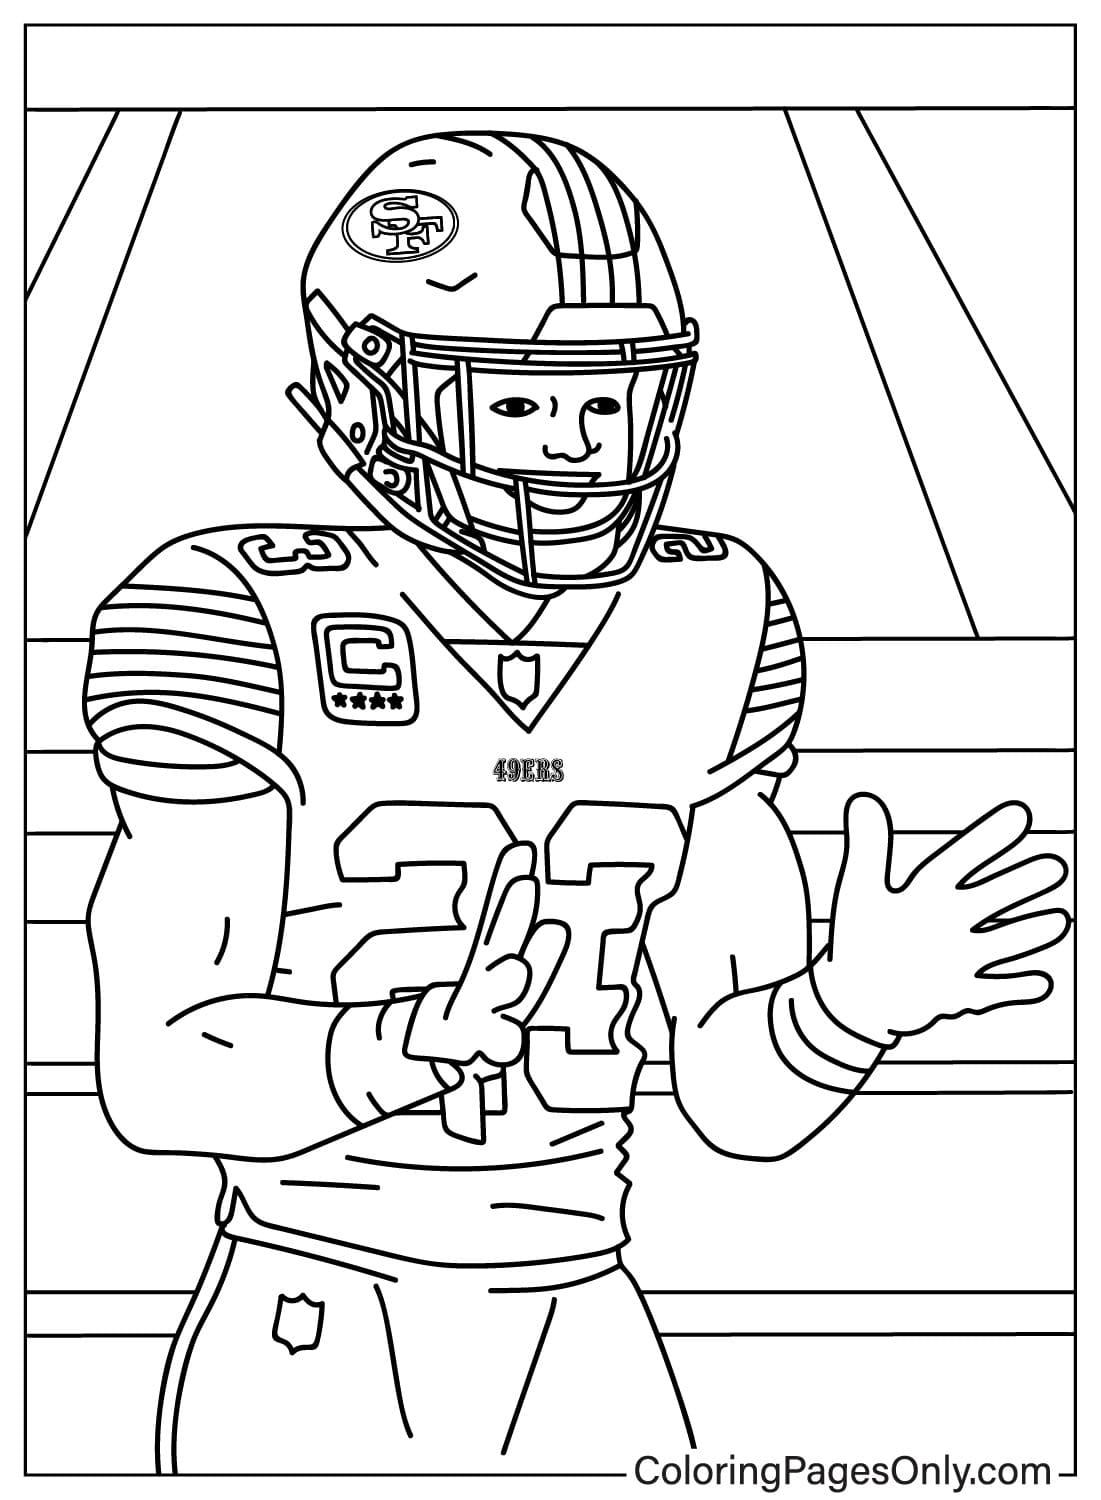 Christian McCaffrey Coloring Page - Free Printable Coloring Pages